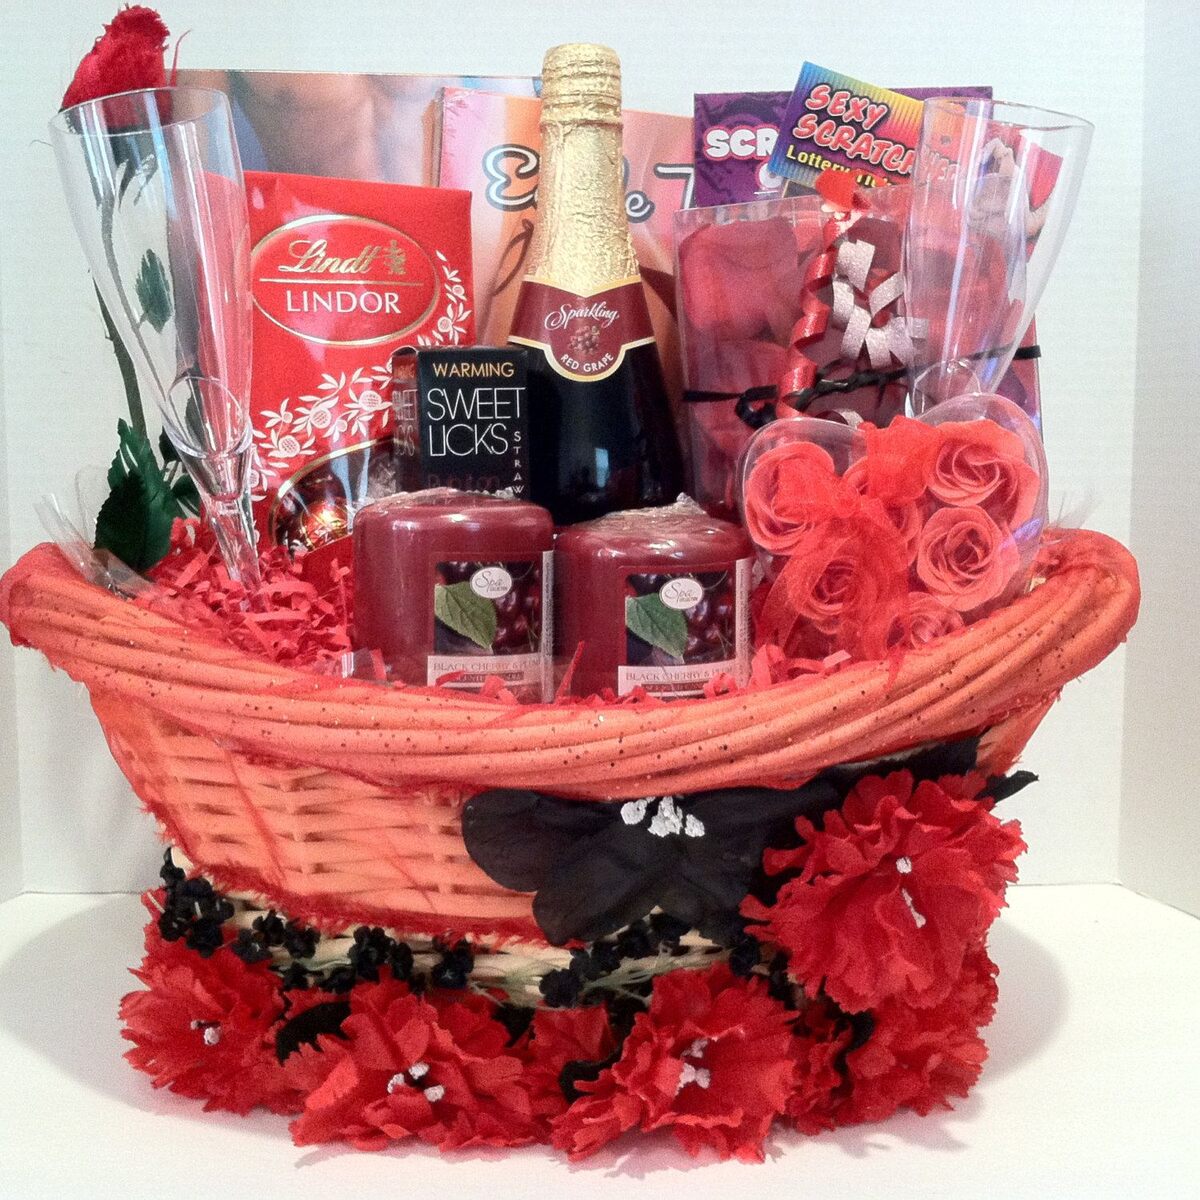 How To Make A Valentine’s Gift Basket